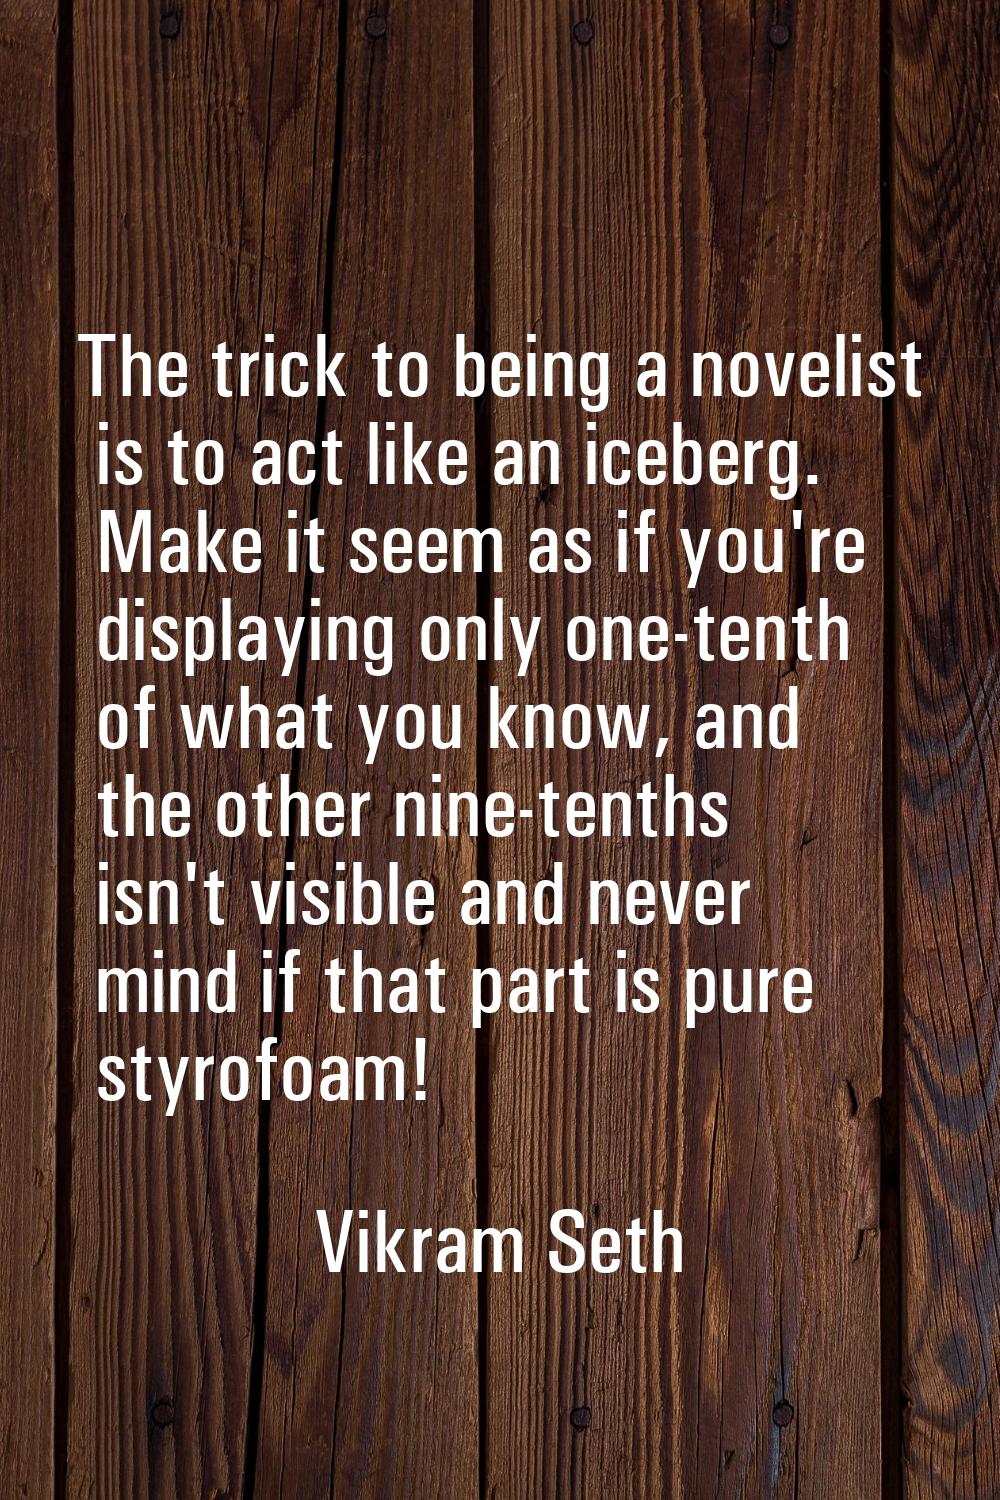 The trick to being a novelist is to act like an iceberg. Make it seem as if you're displaying only 